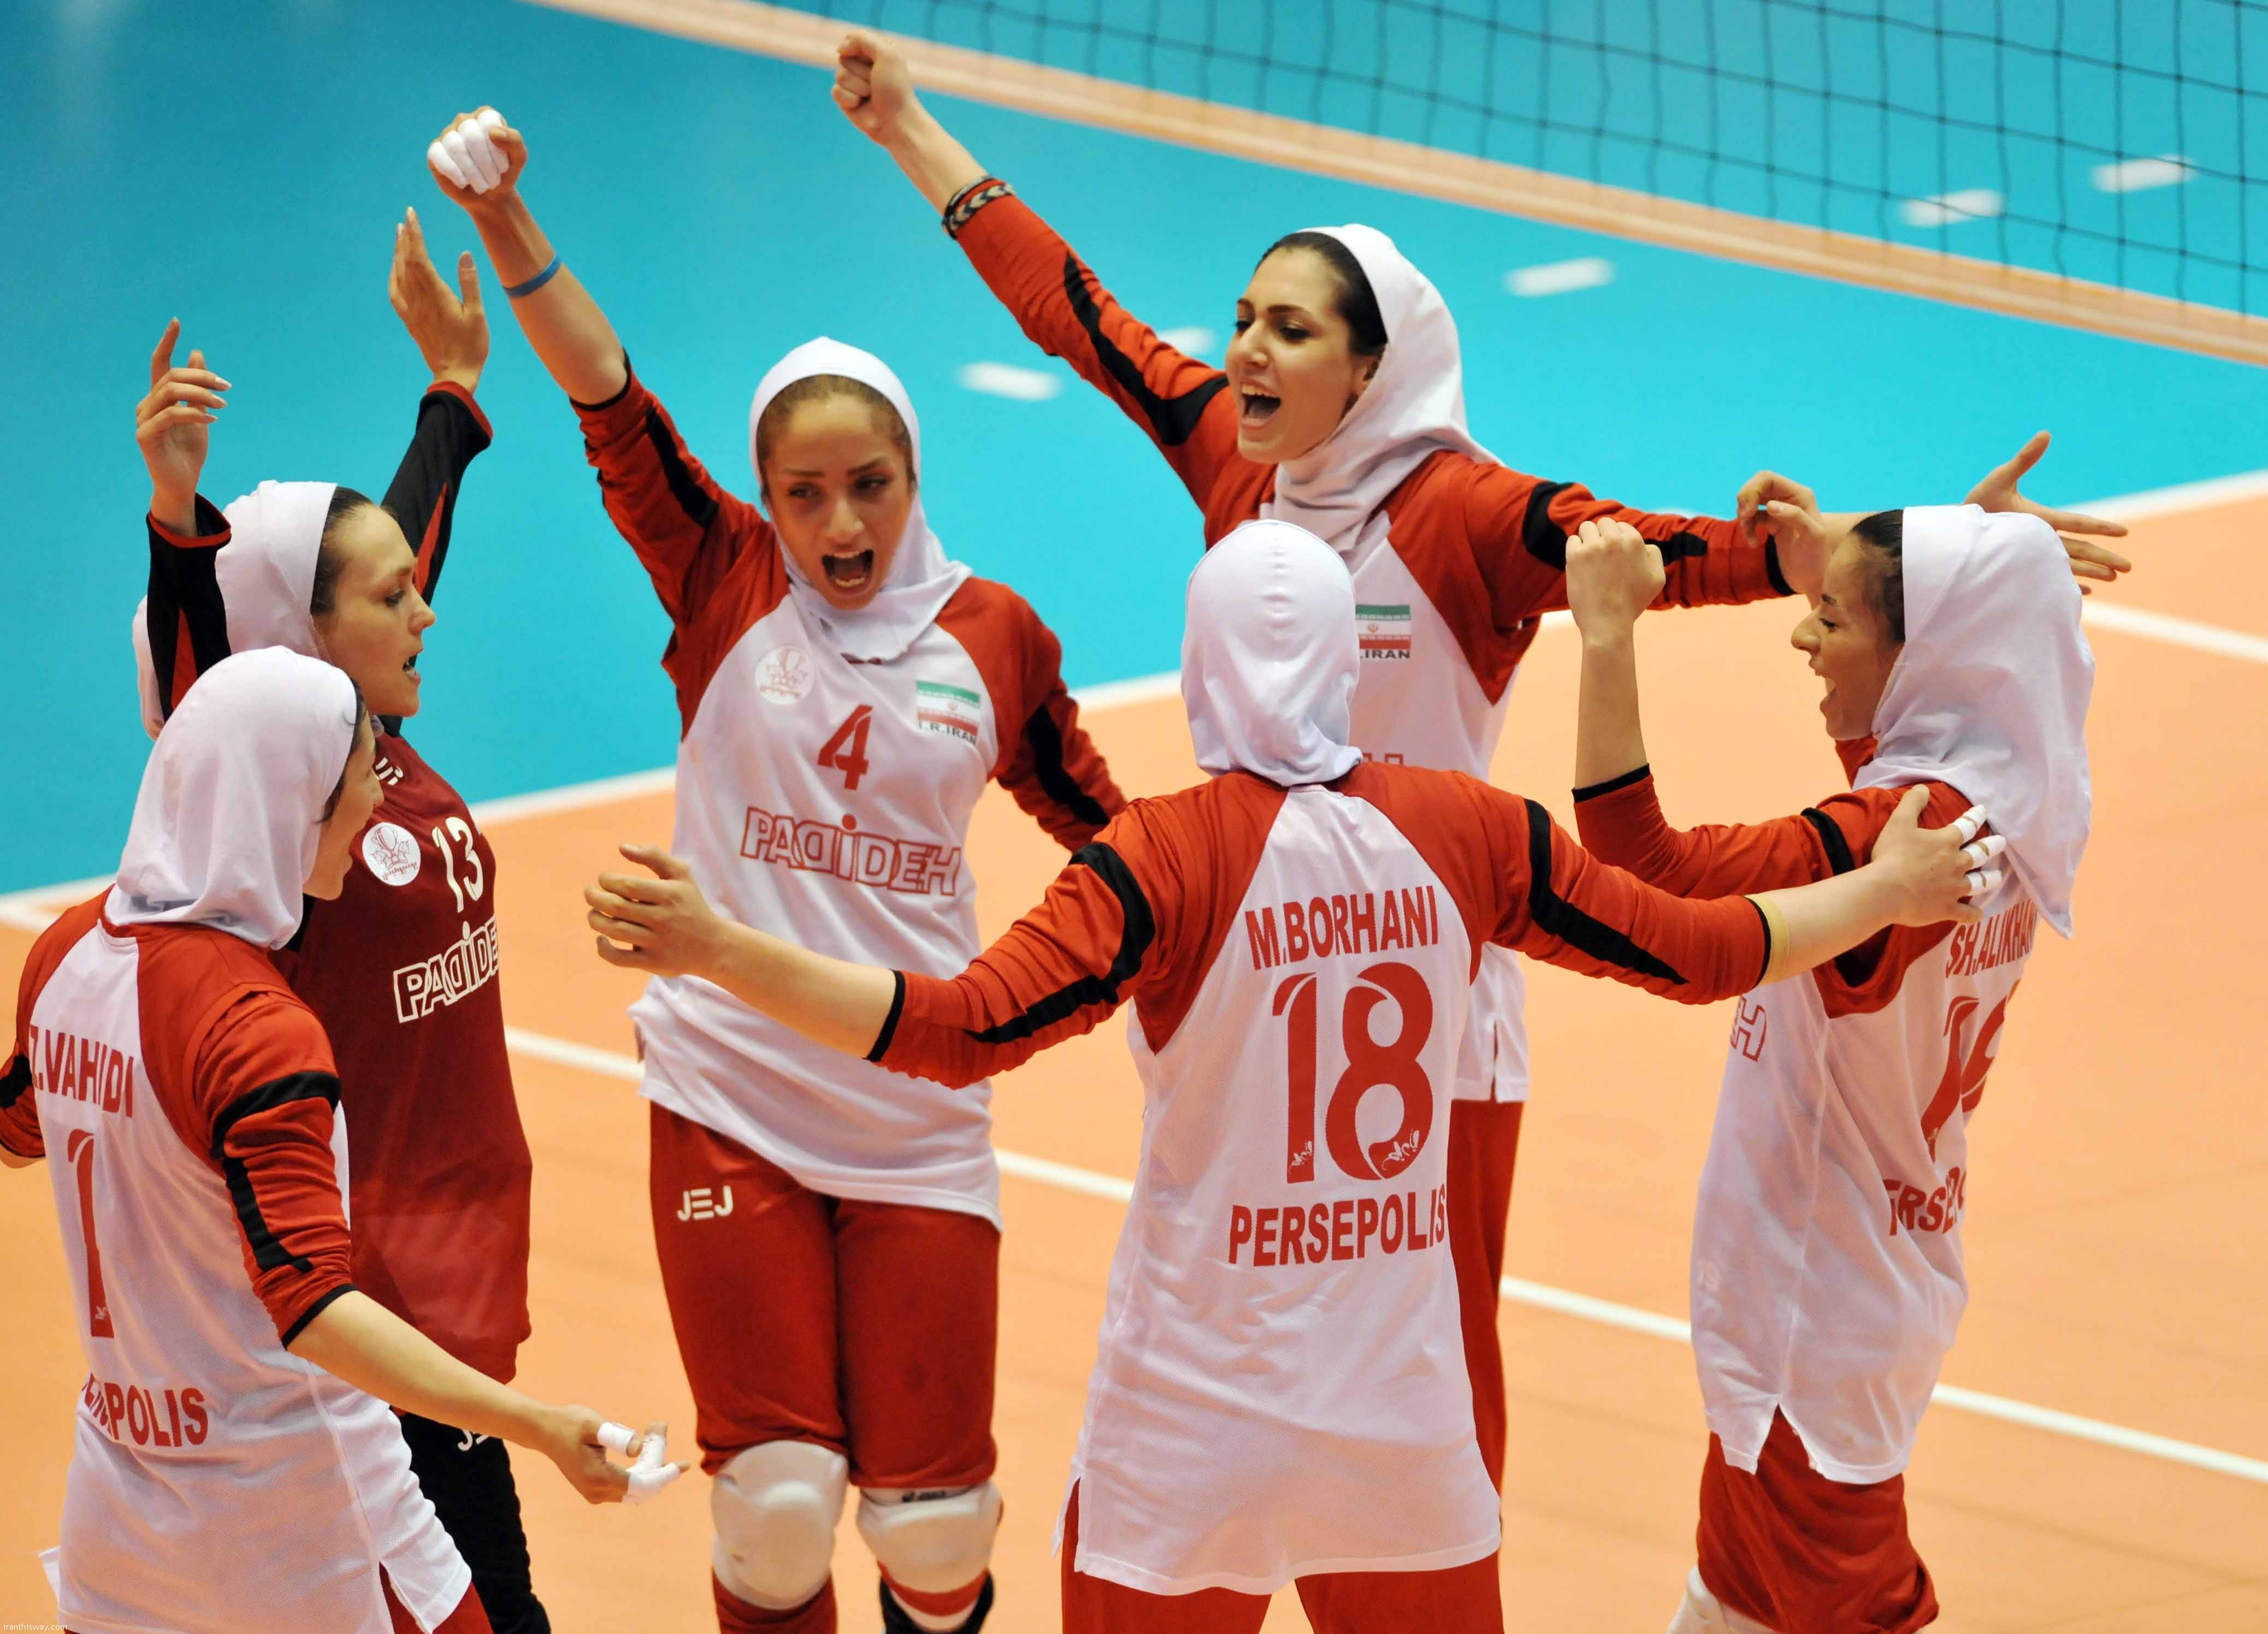 Iran’s representatives have made a winning start to their campaign at the 2016 Asian Women’s Club Volleyball Championship in the Philippines.